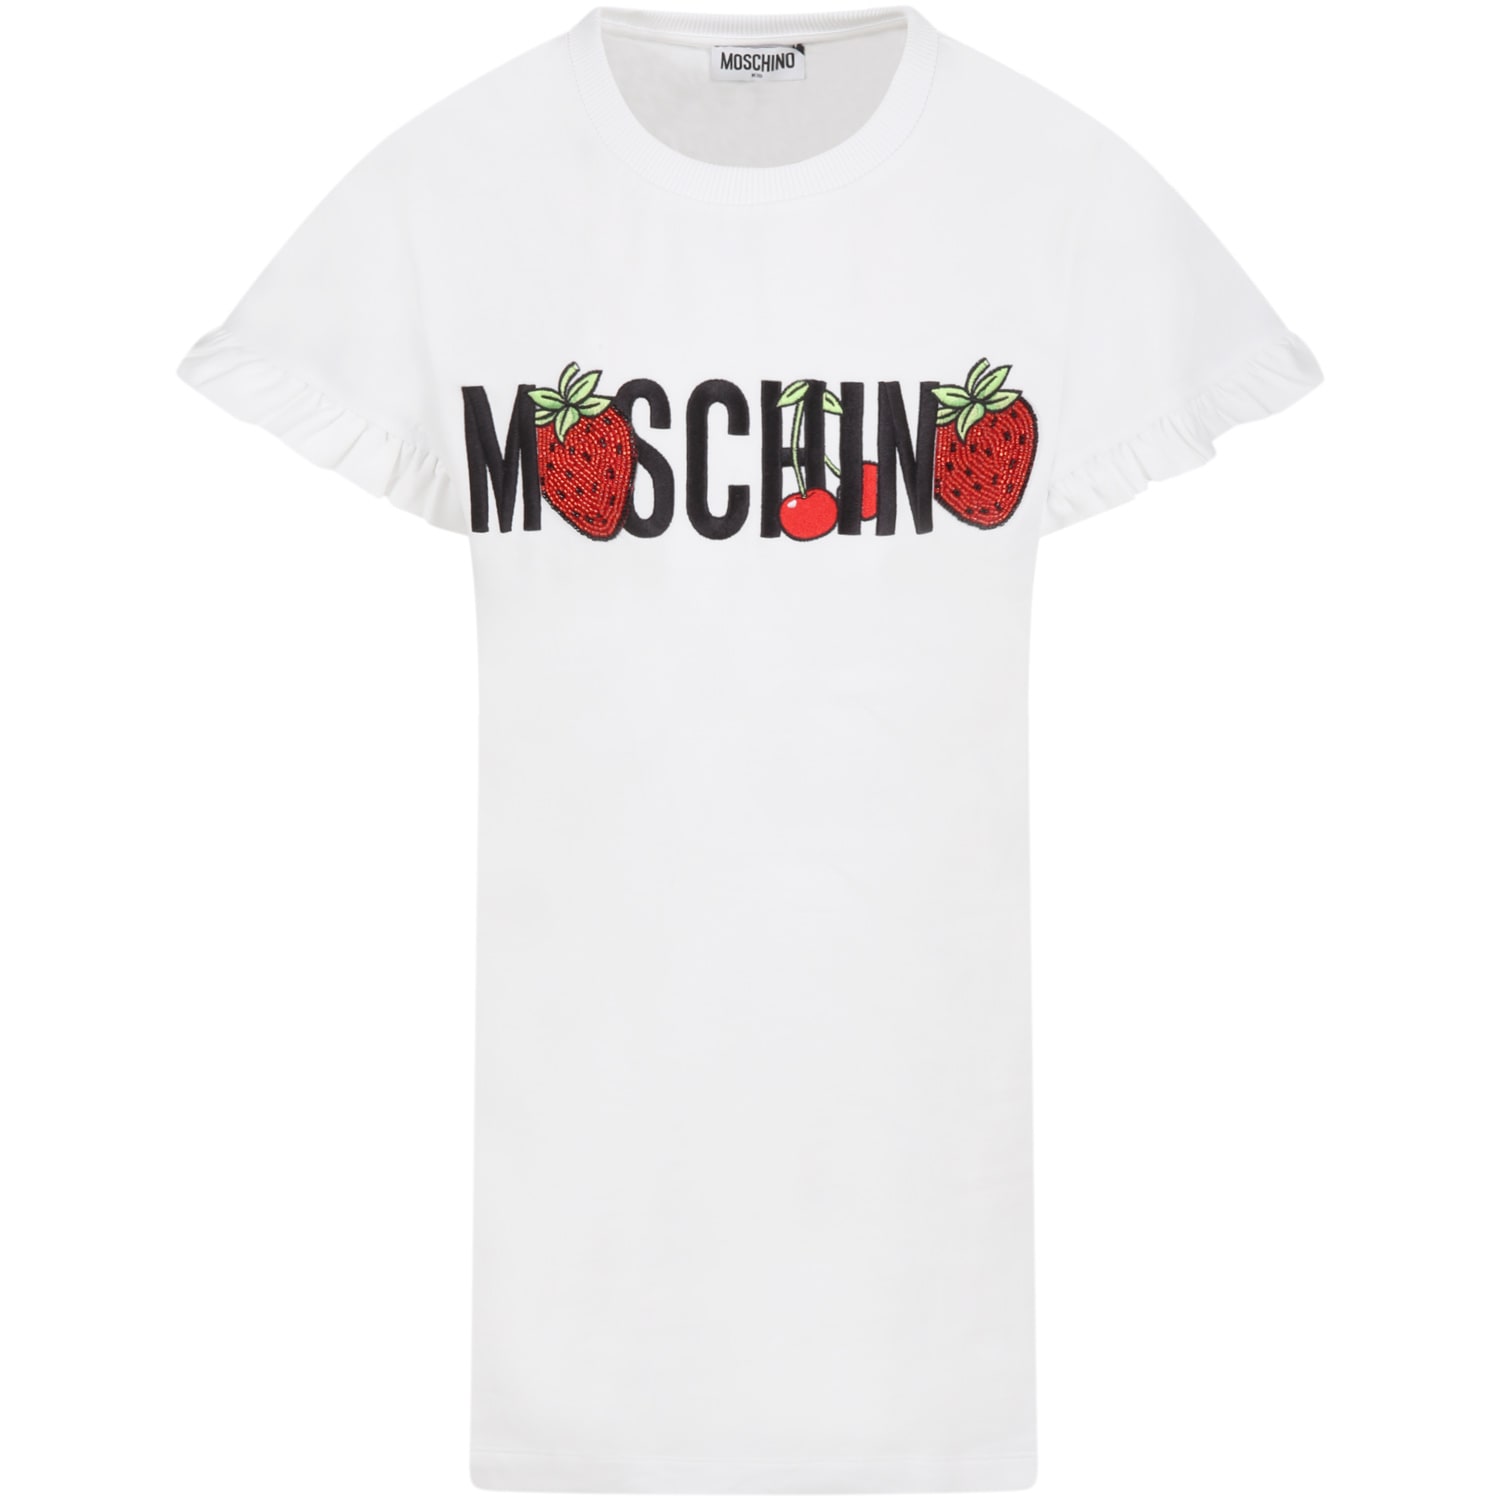 Moschino White Dress For Girl With Strawberries